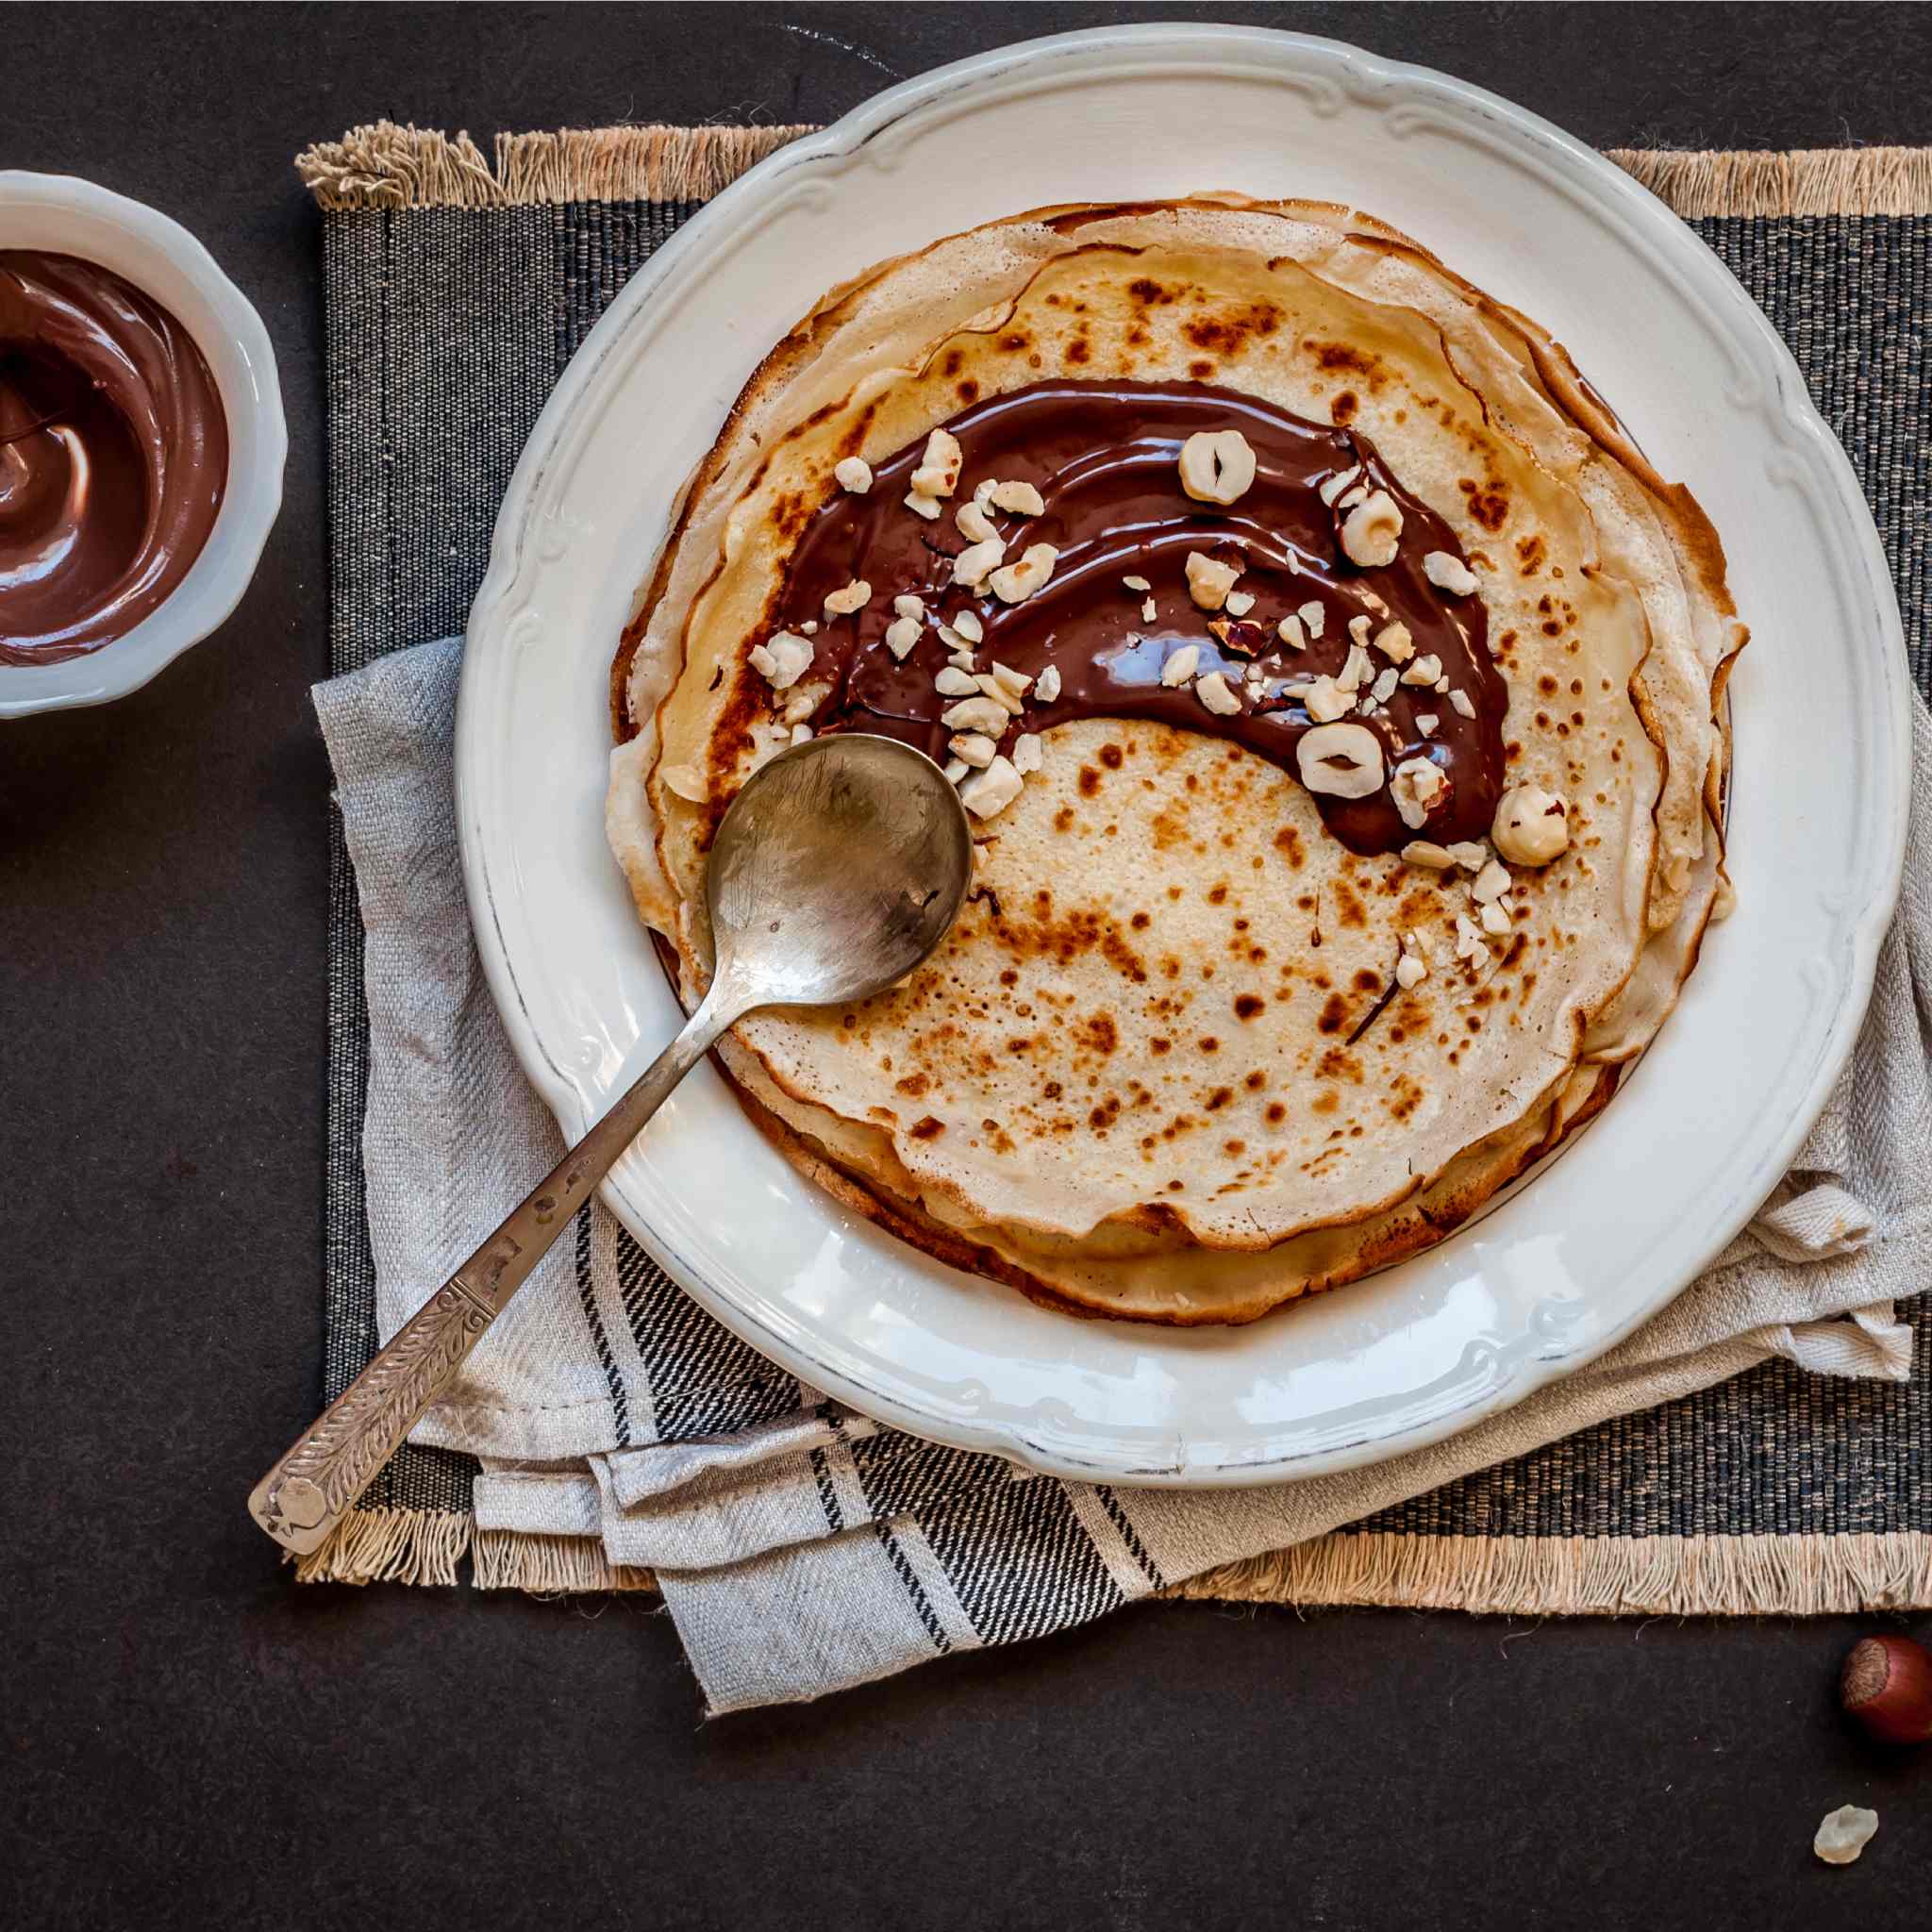 Stack of pancakes spread with Nutella and topped with crushed hazelnuts